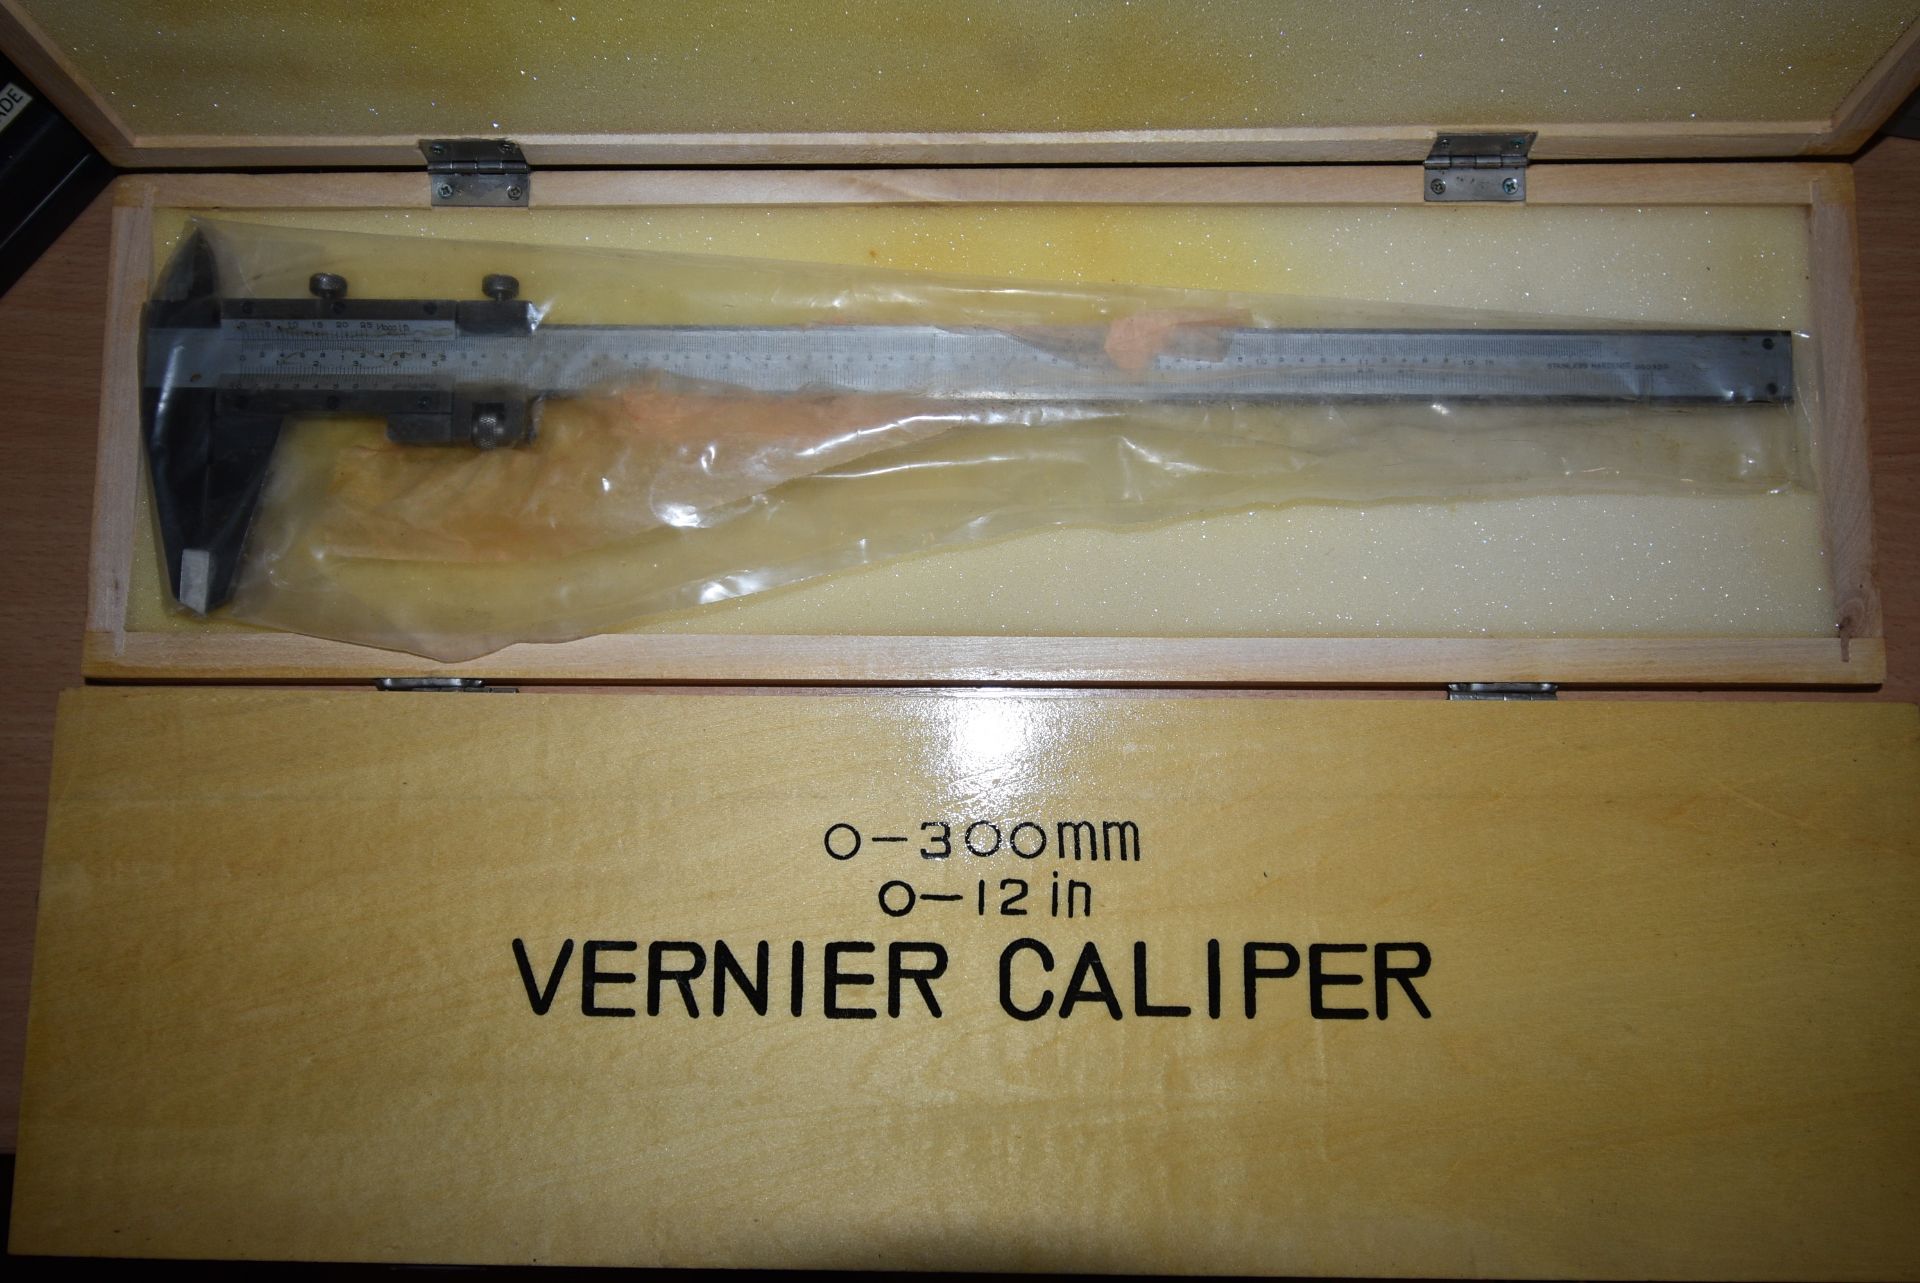 Two 0-300mm 0-12" Vernier Calipers